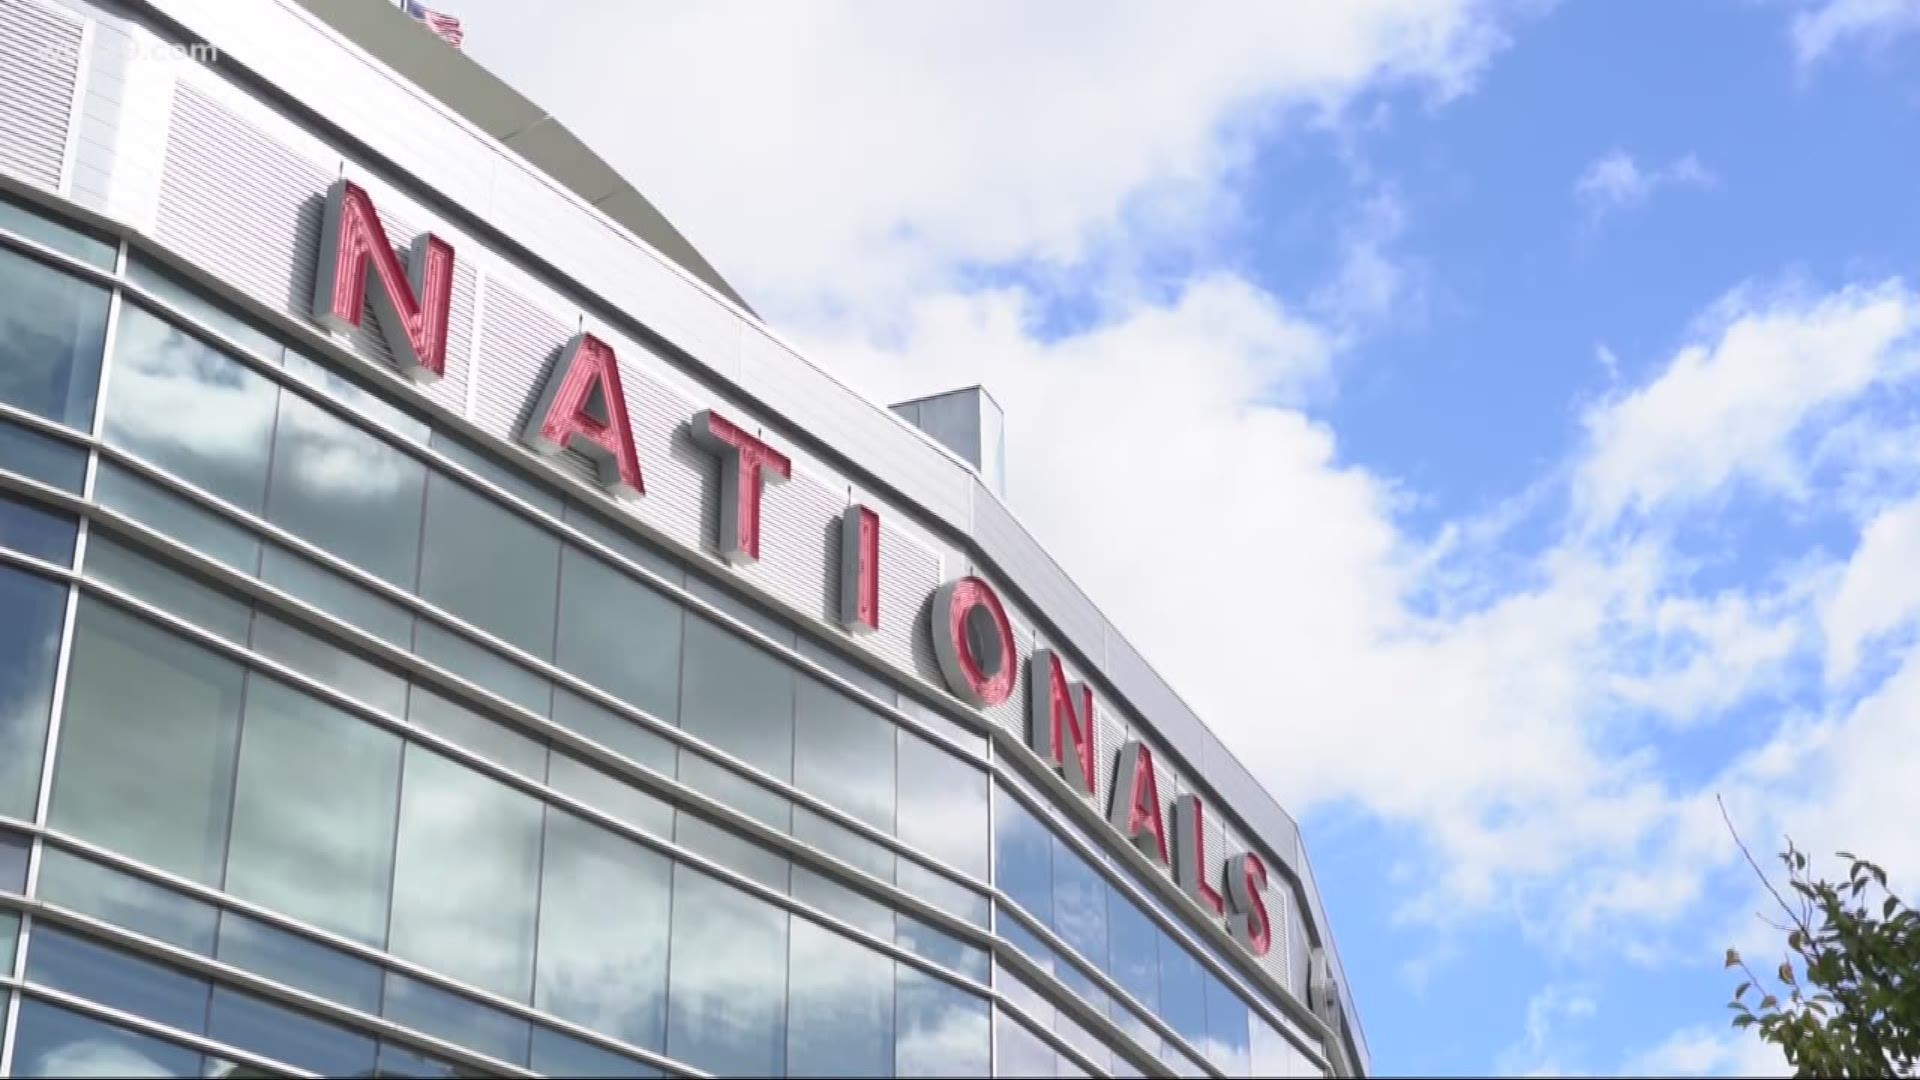 Bruce Johnson and Nathan Baca discuss the cost of Nats Park — how expensive is it? And who is paying?